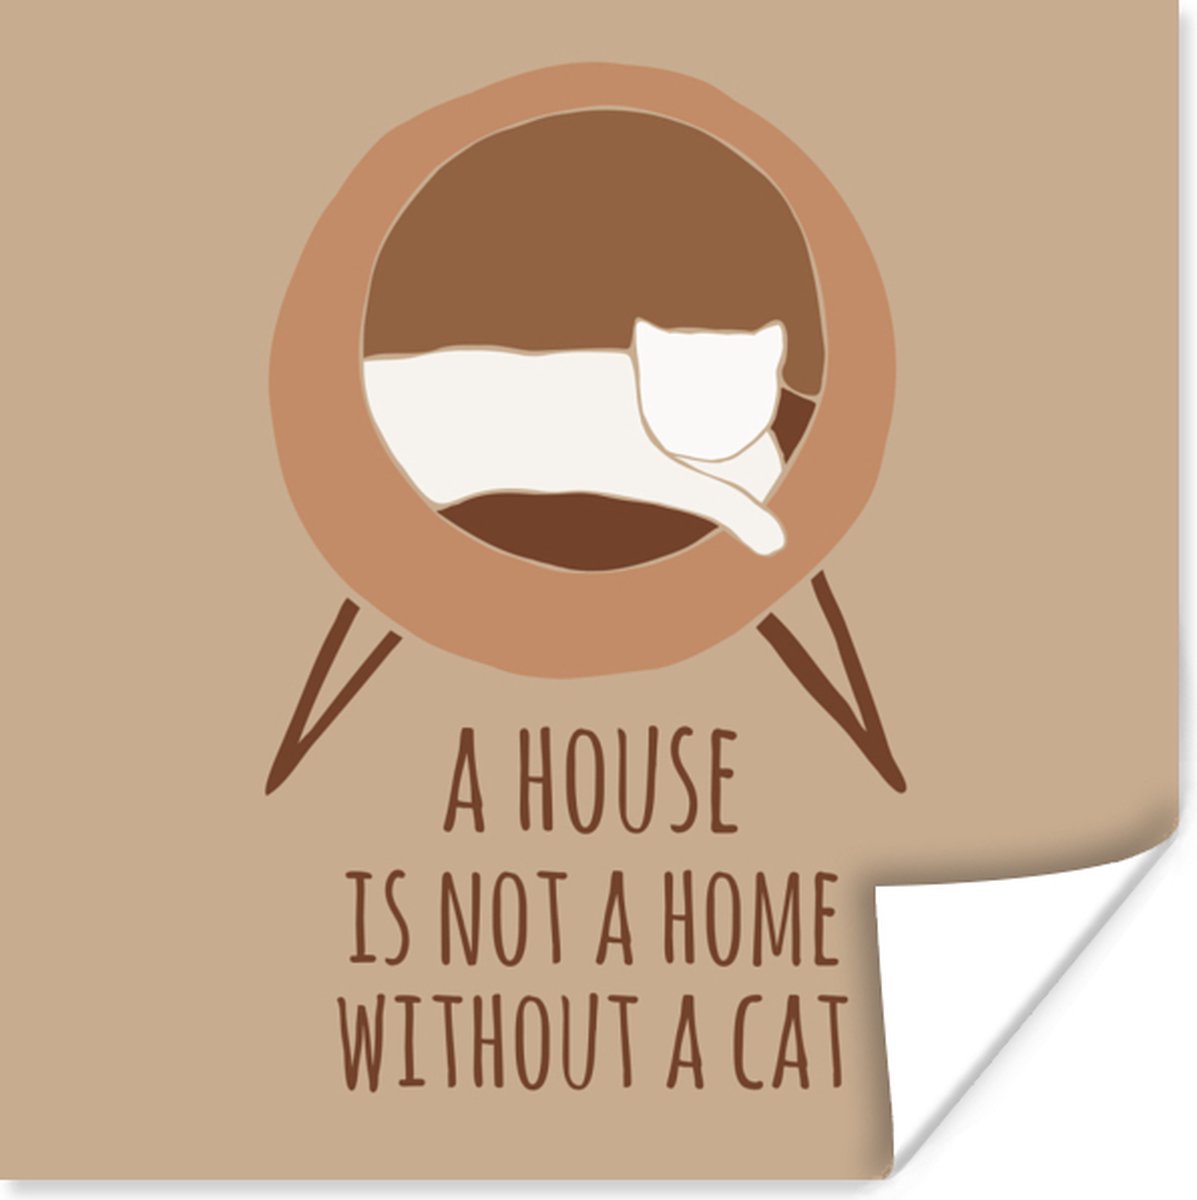 Poster Spreuken - A house is not a home without a cat - Katten - Quotes - Minimalisme - 75x75 cm - PosterMonkey